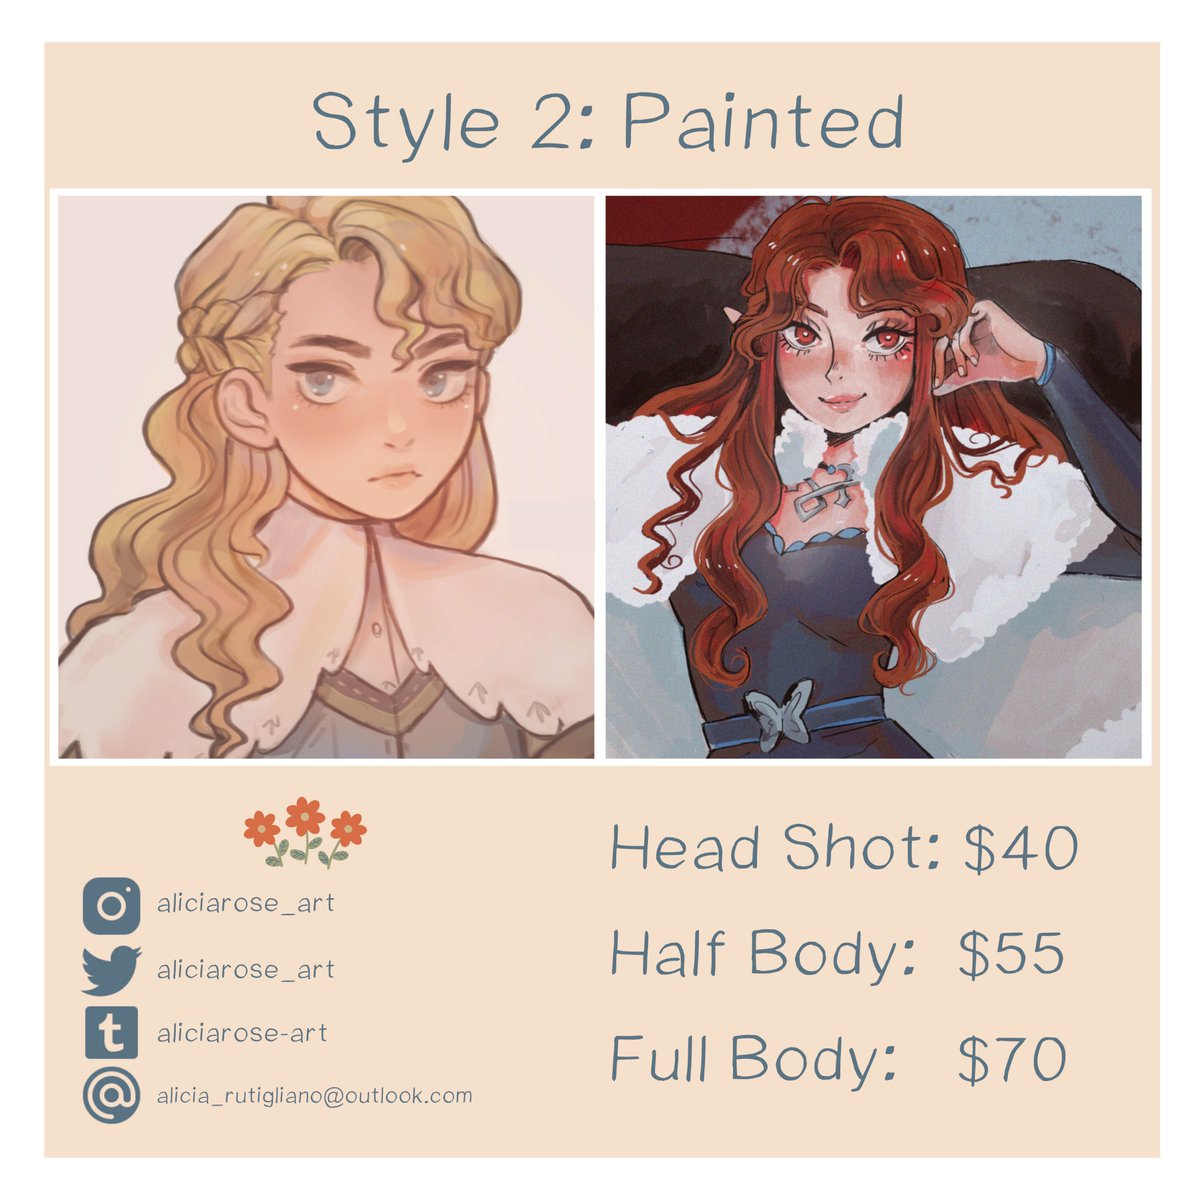 Finally dropping those commission prices!! Please feel free to contact me via DM or email if you have any questions 